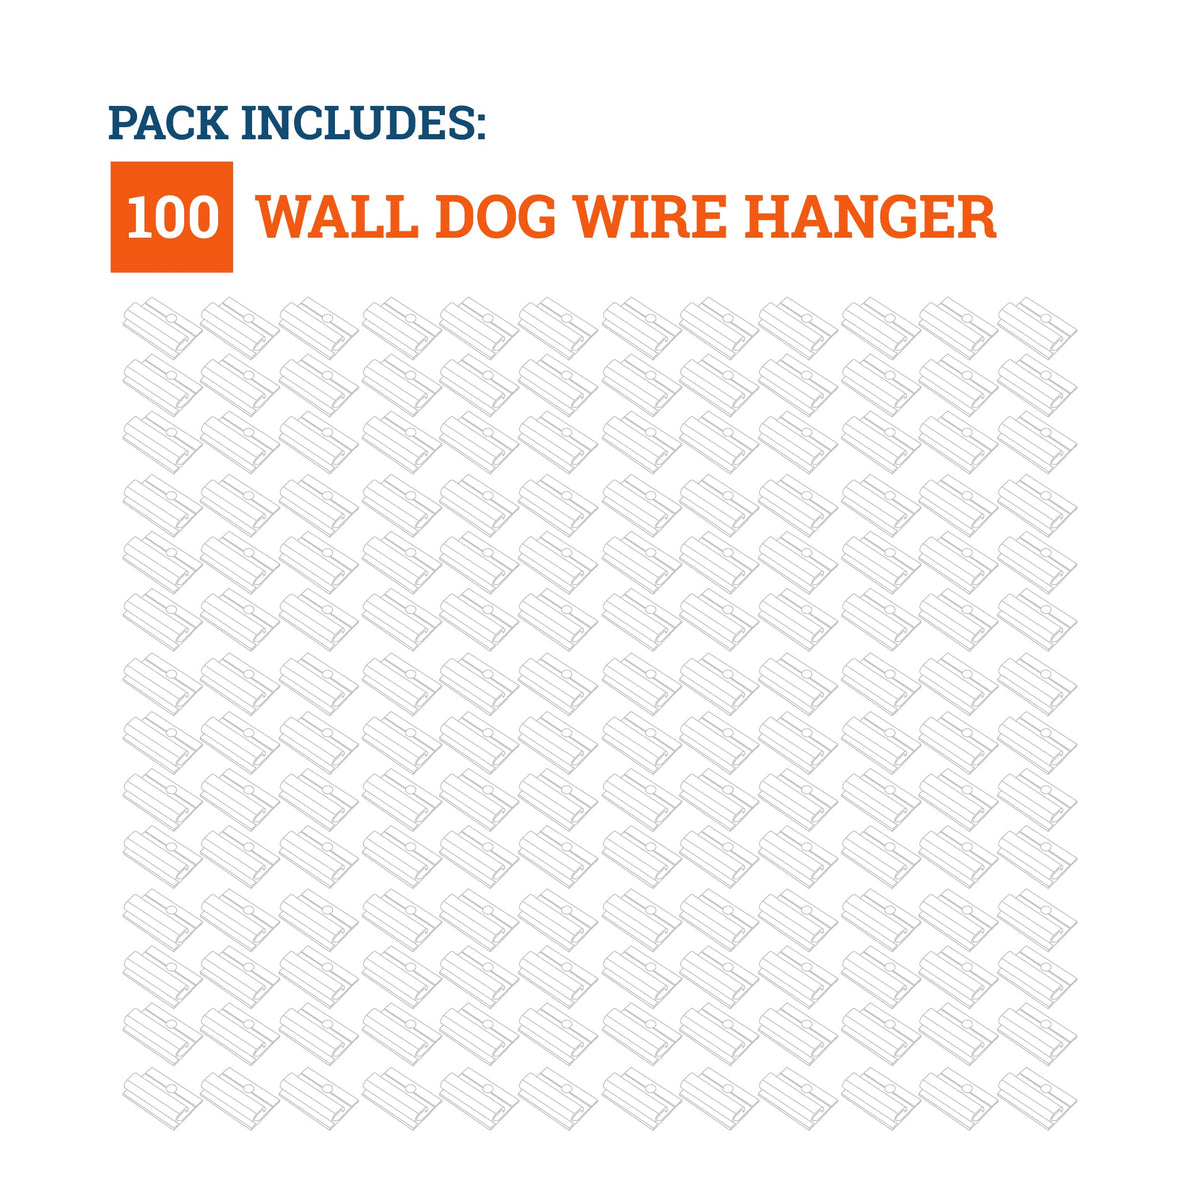 Wire Hanger 40 lbs - 1000 Pack ($1.00 each)